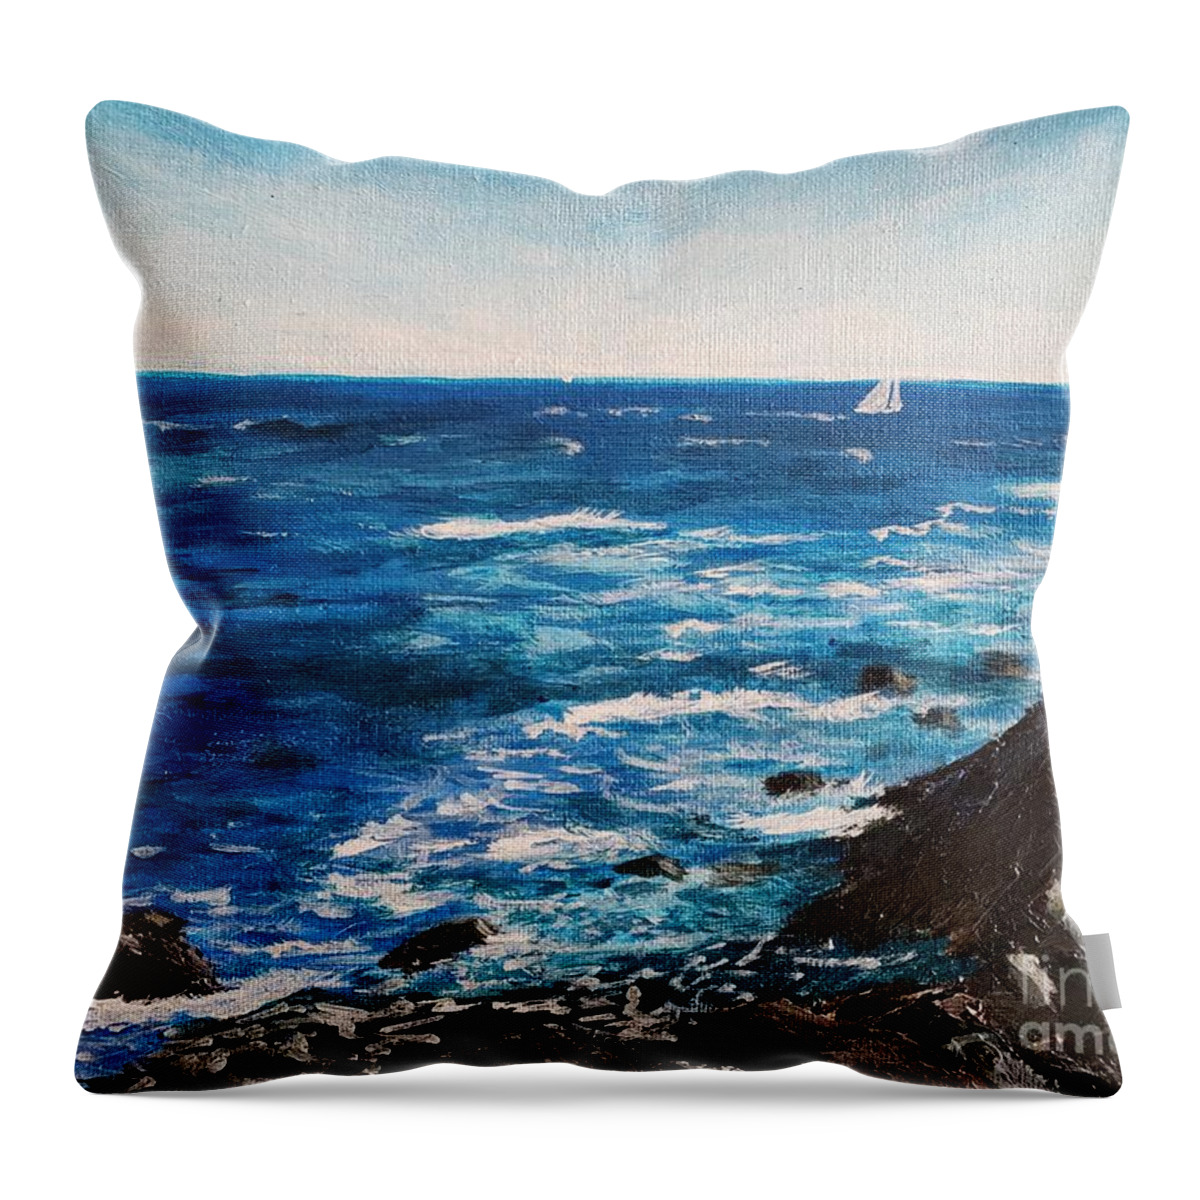 Blue. White Throw Pillow featuring the painting Making Waves by the Cliff Walk, Newport, Rhode Island by C E Dill